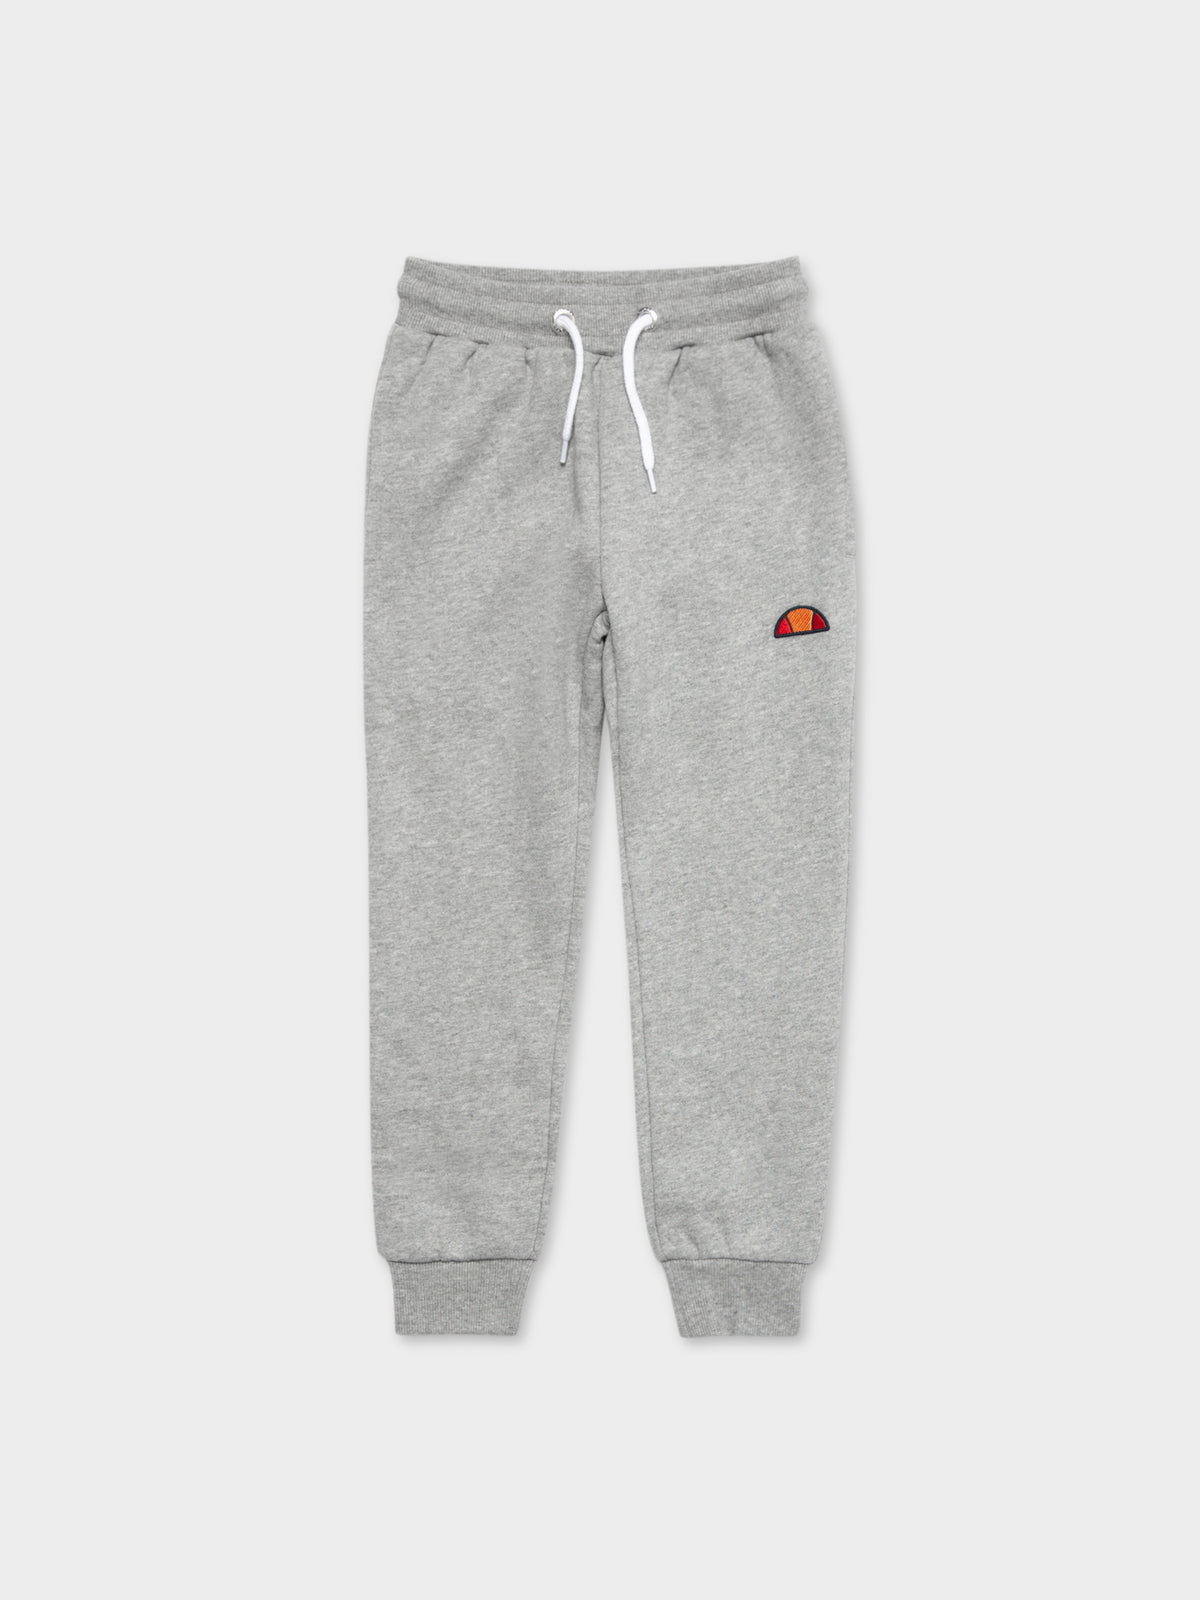 Infants Colino Track Pants in Grey Marle